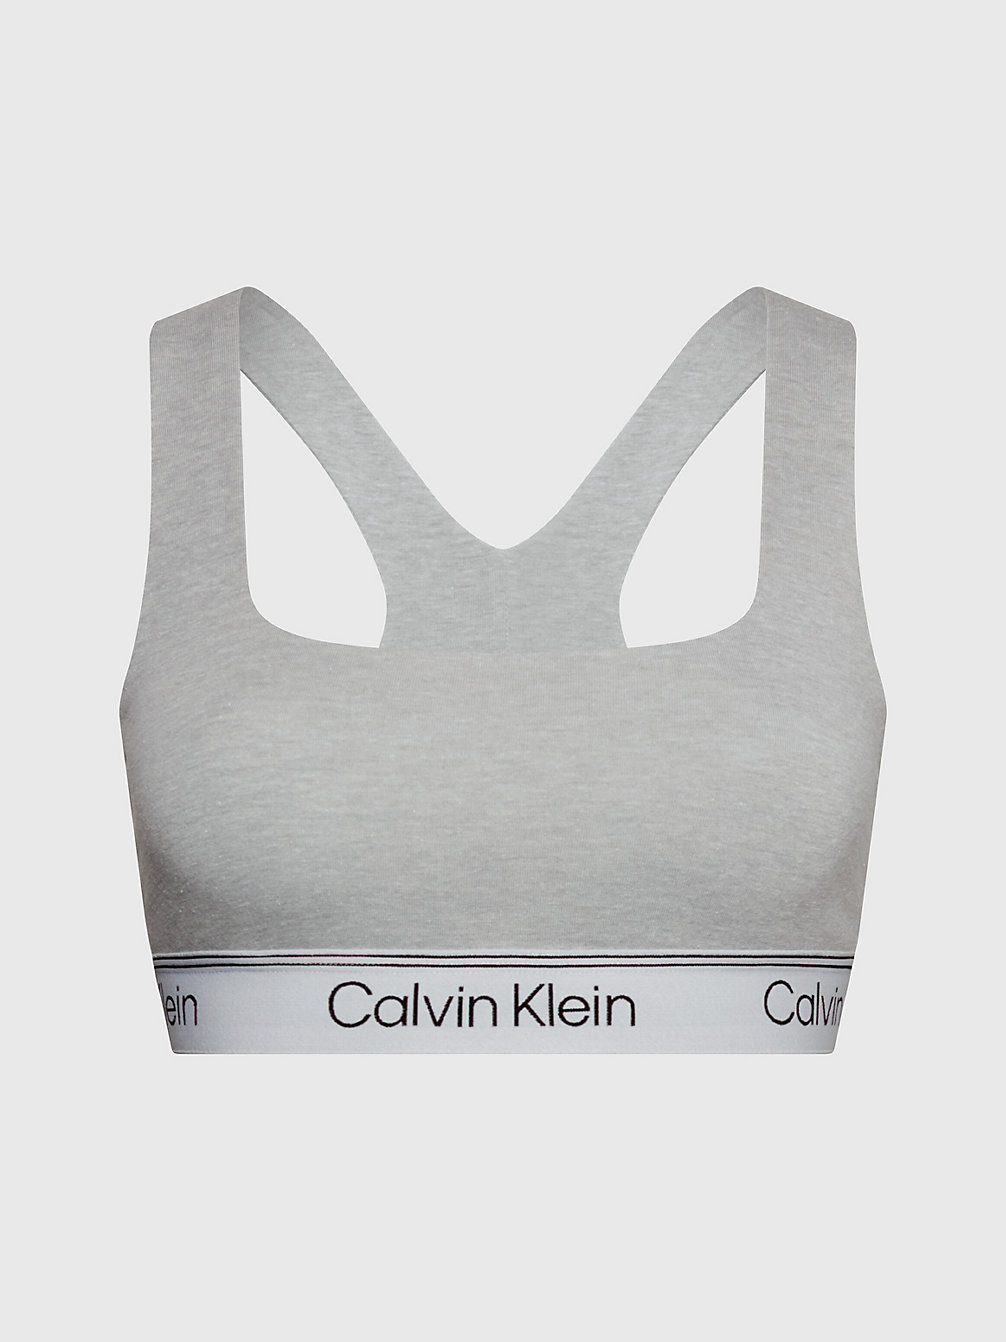 Corpiño - Athletic Cotton > ATH GREY HEATHER > undefined mujer > Calvin Klein